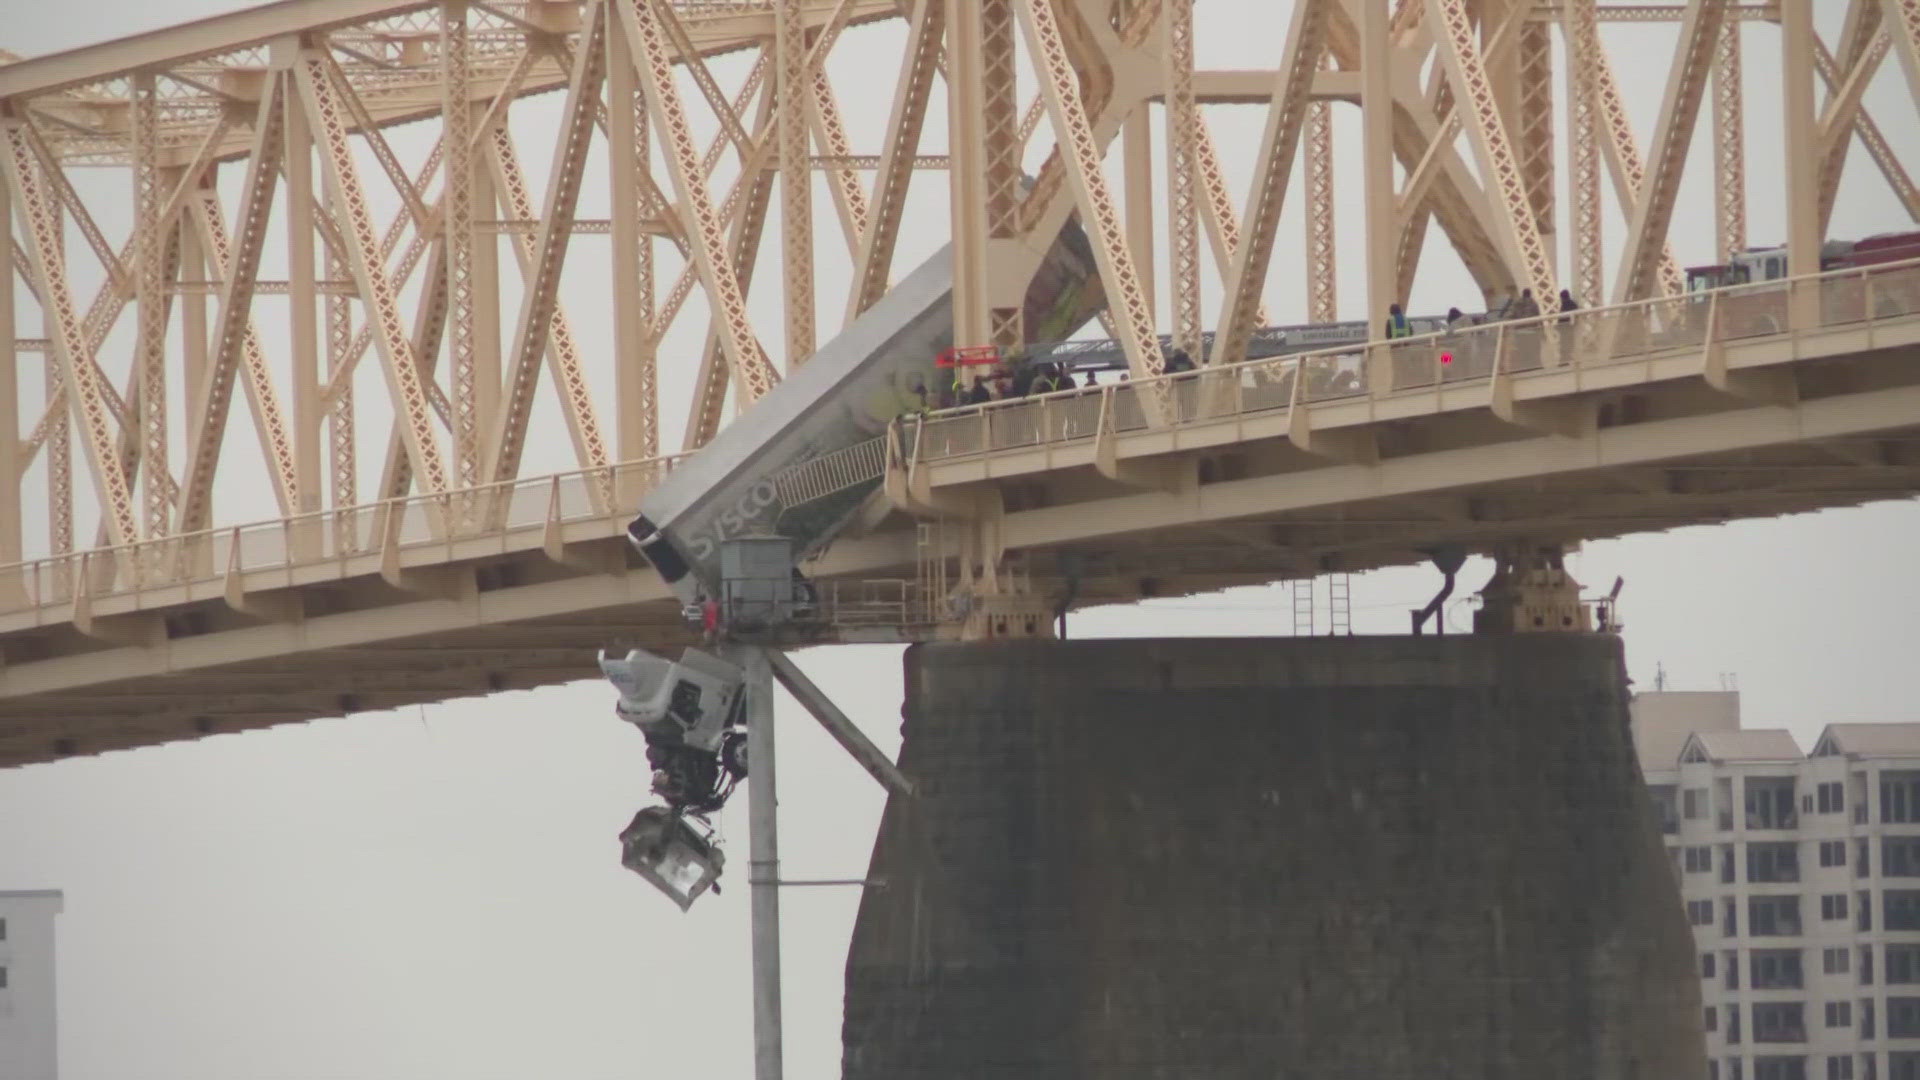 The crash back on March 1 sent a semi through the bridge's railing. It then dangled nearly 100 feet over the Ohio River with the driver inside for 45 minutes.